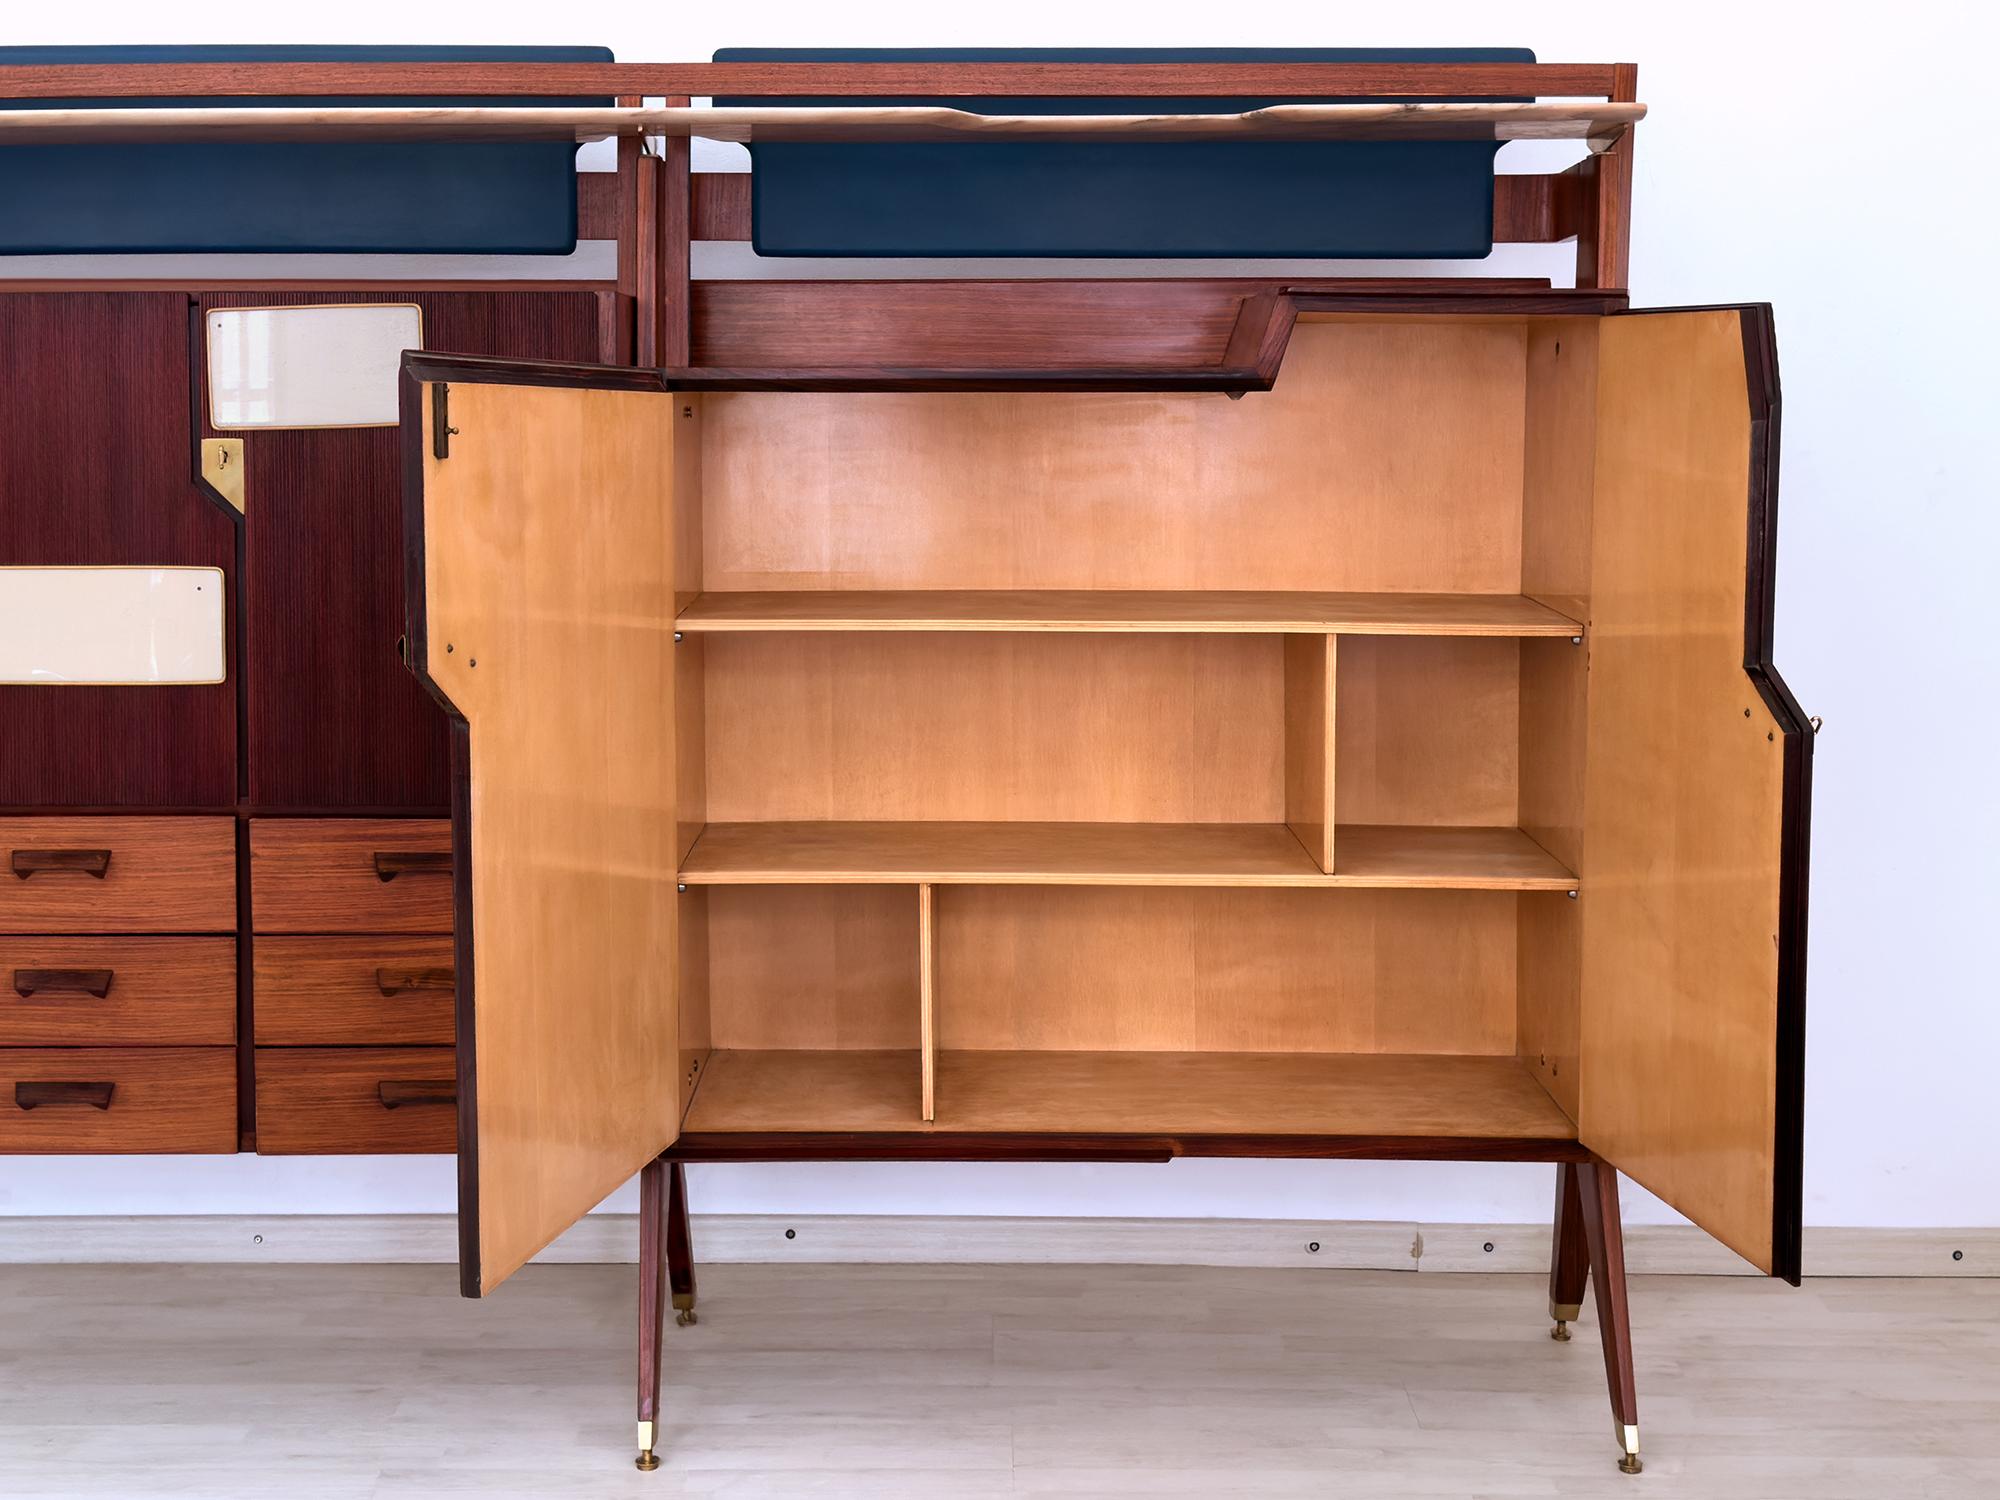 Italian Midcentury Sideboard or Bar Cabinet by La Permanente Mobili Cantù, 1950s For Sale 2